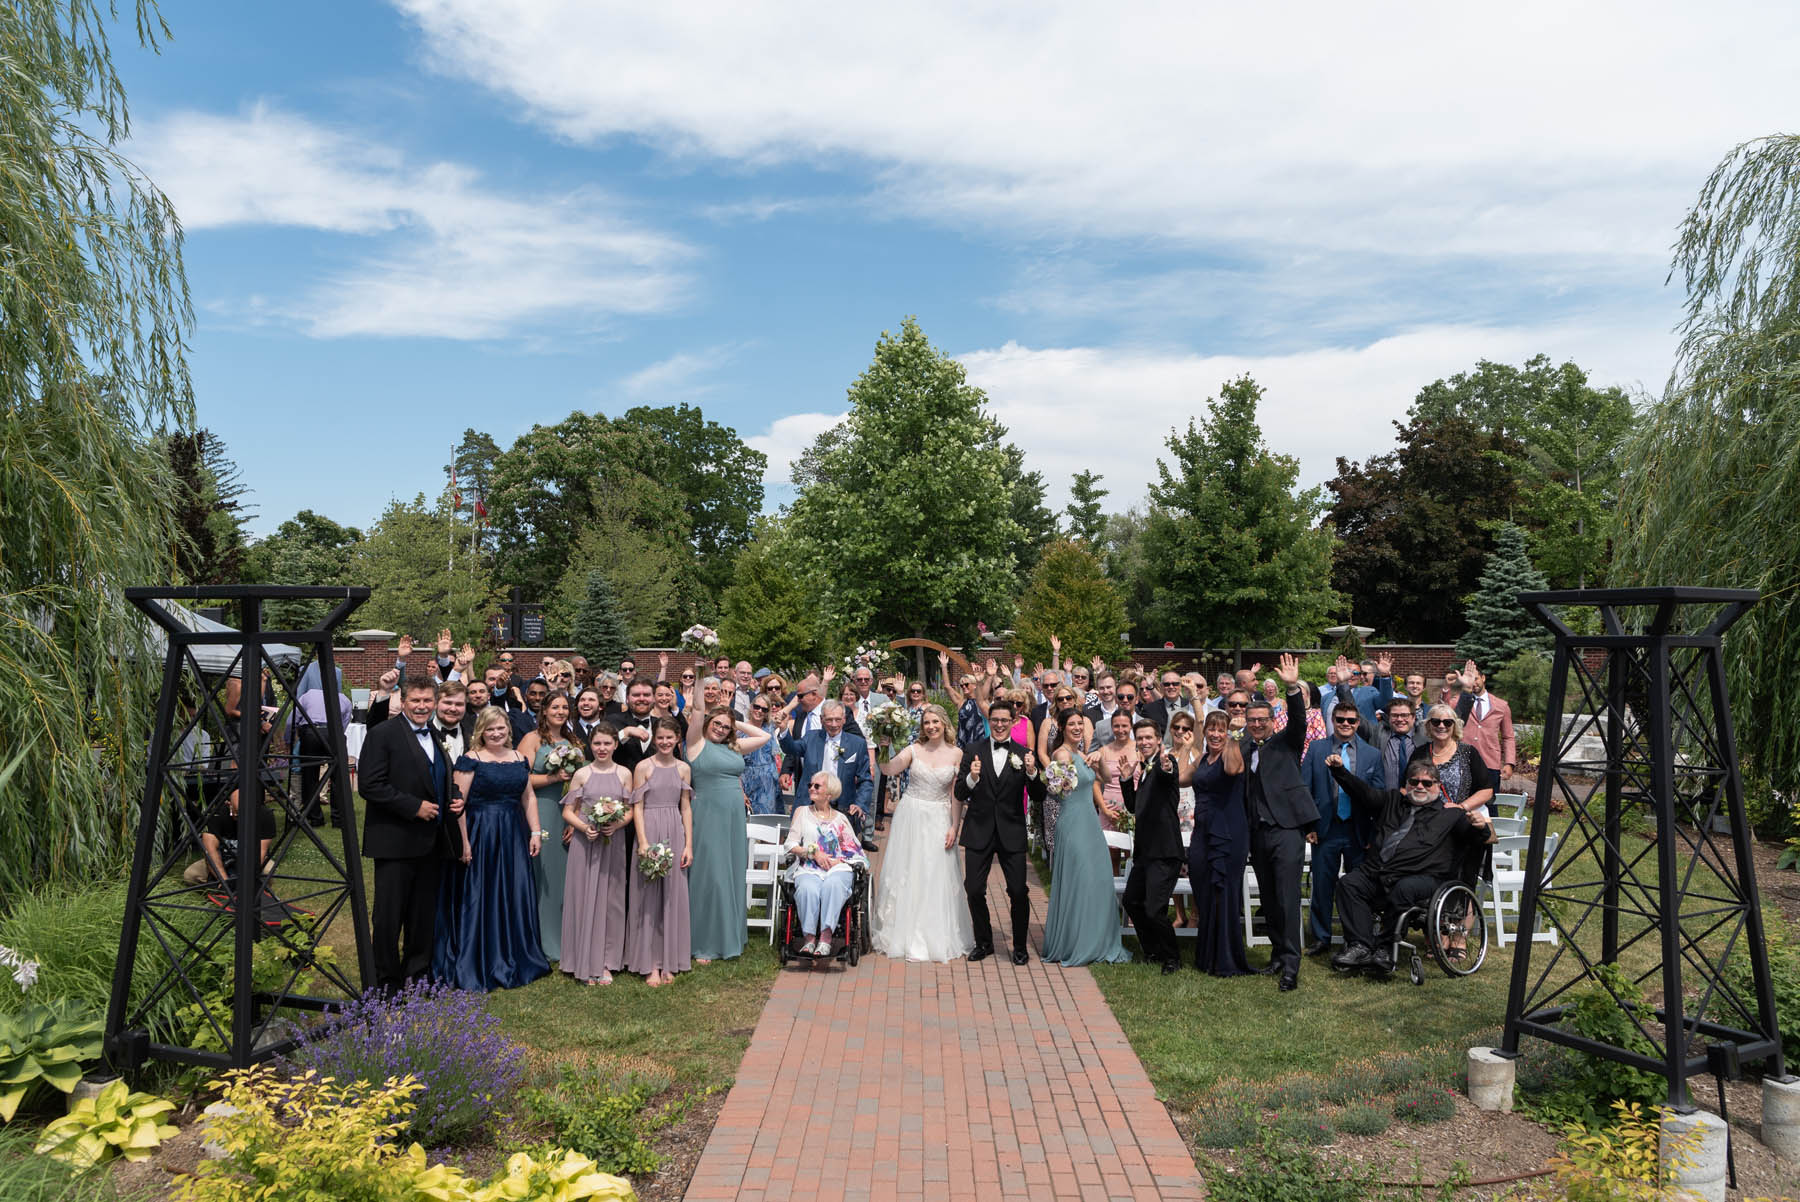 Exceptional Wedding Photography by a Professional - Meagan + Eric